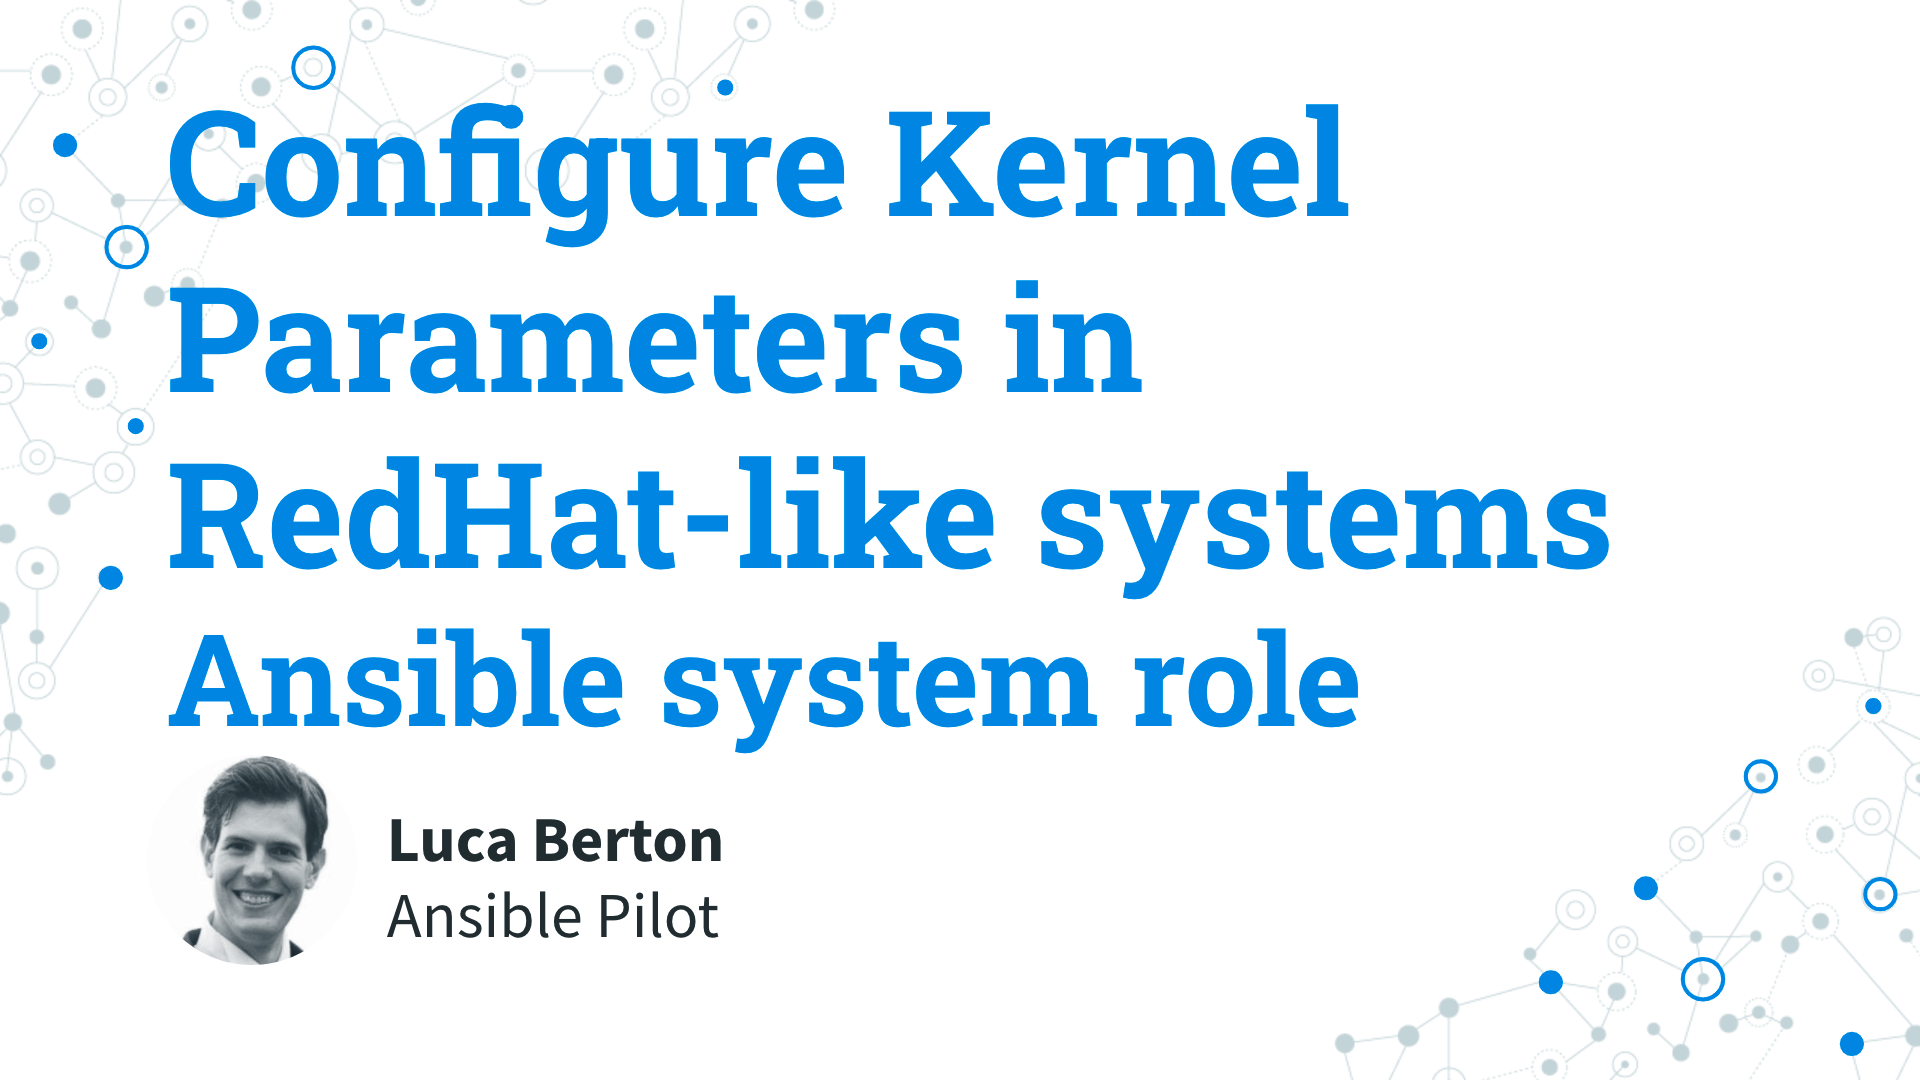 Configure Kernel Parameters in RedHat-like Linux systems - Ansible system role